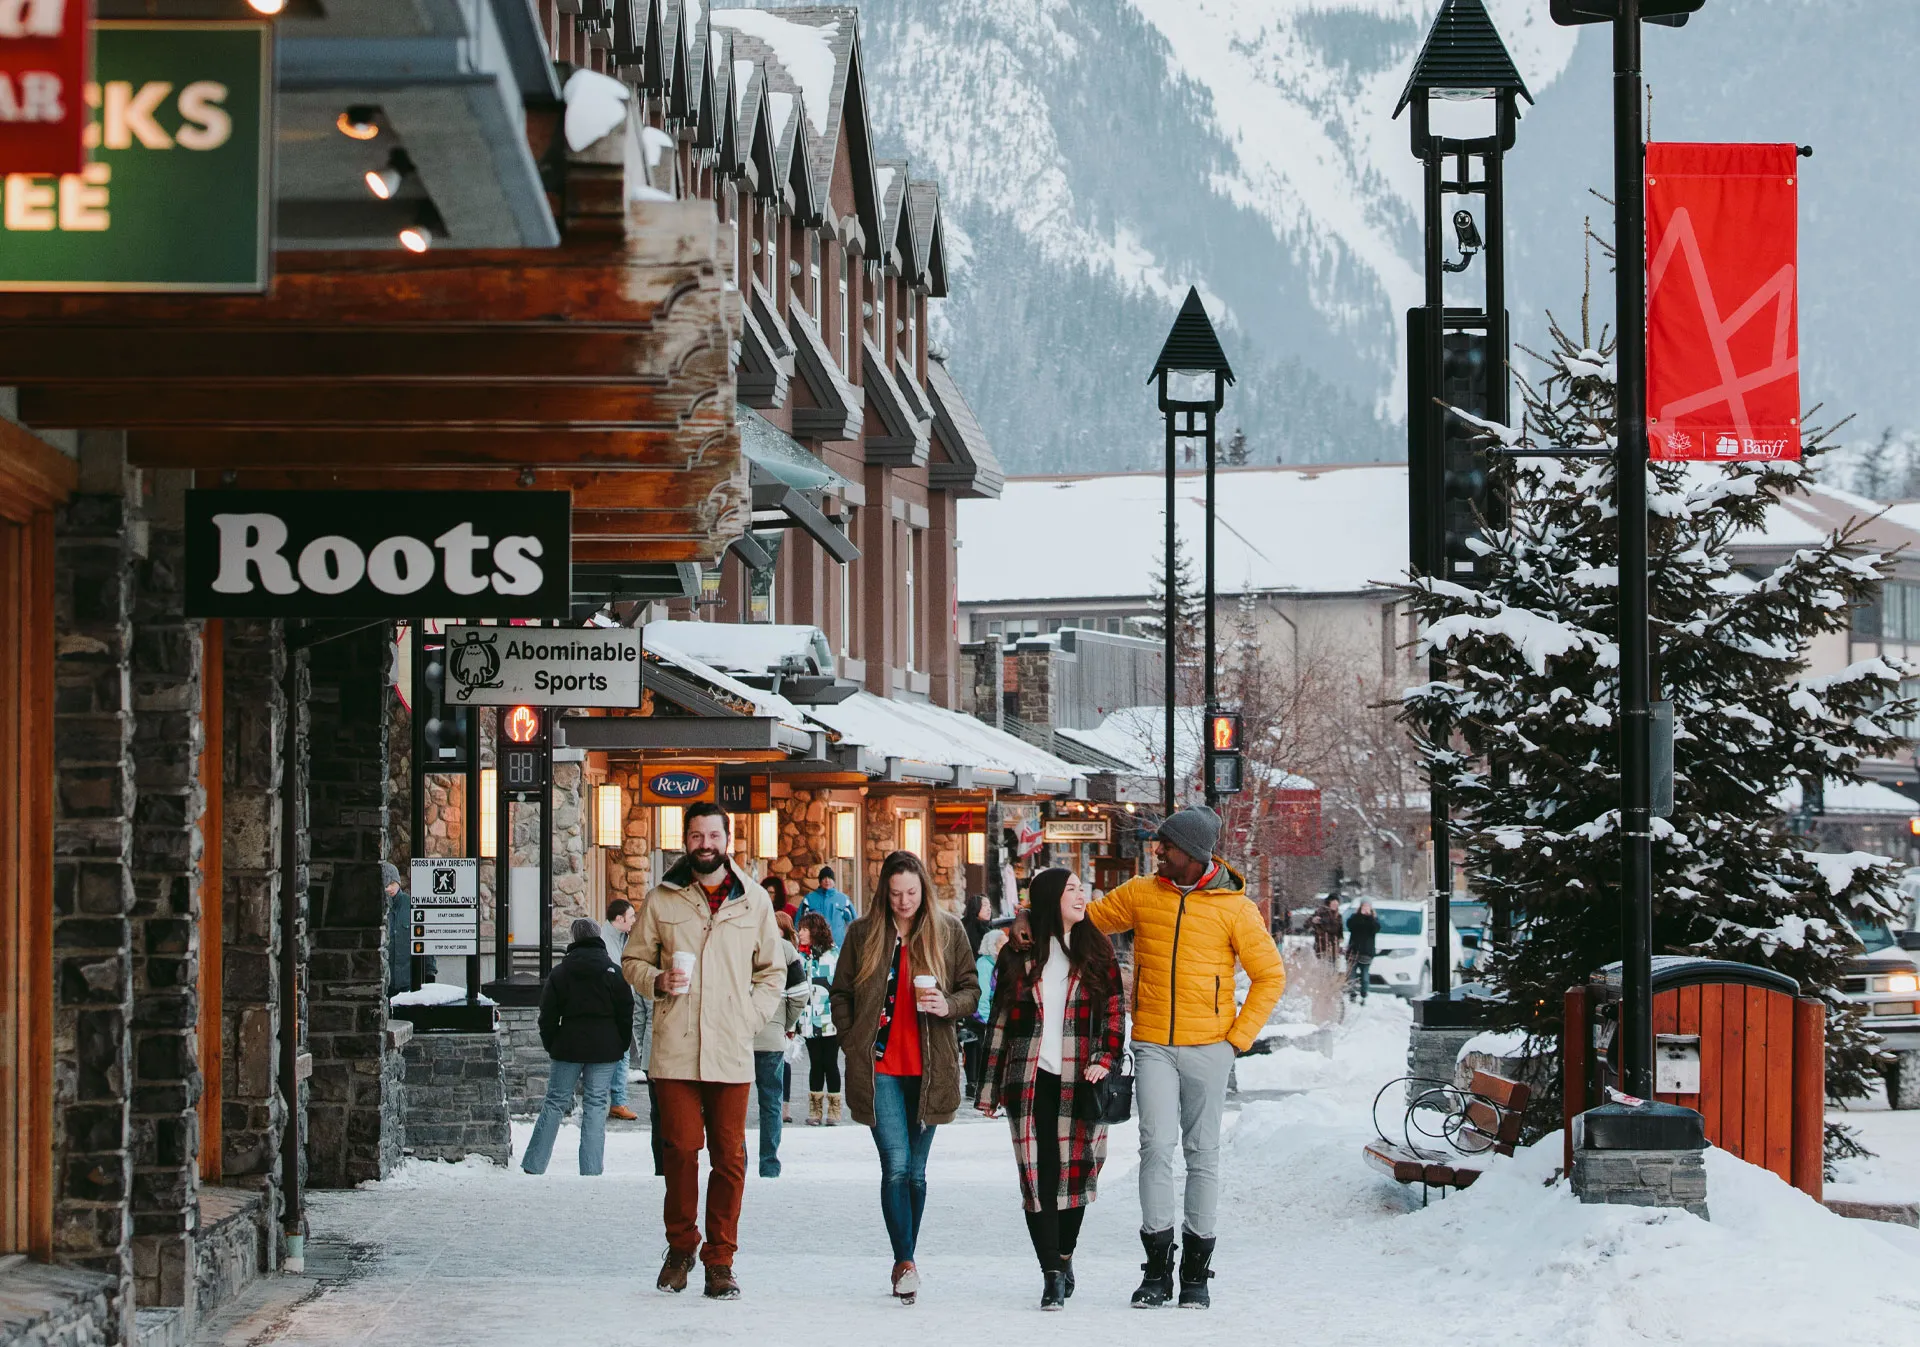 Exploring the town of Banff